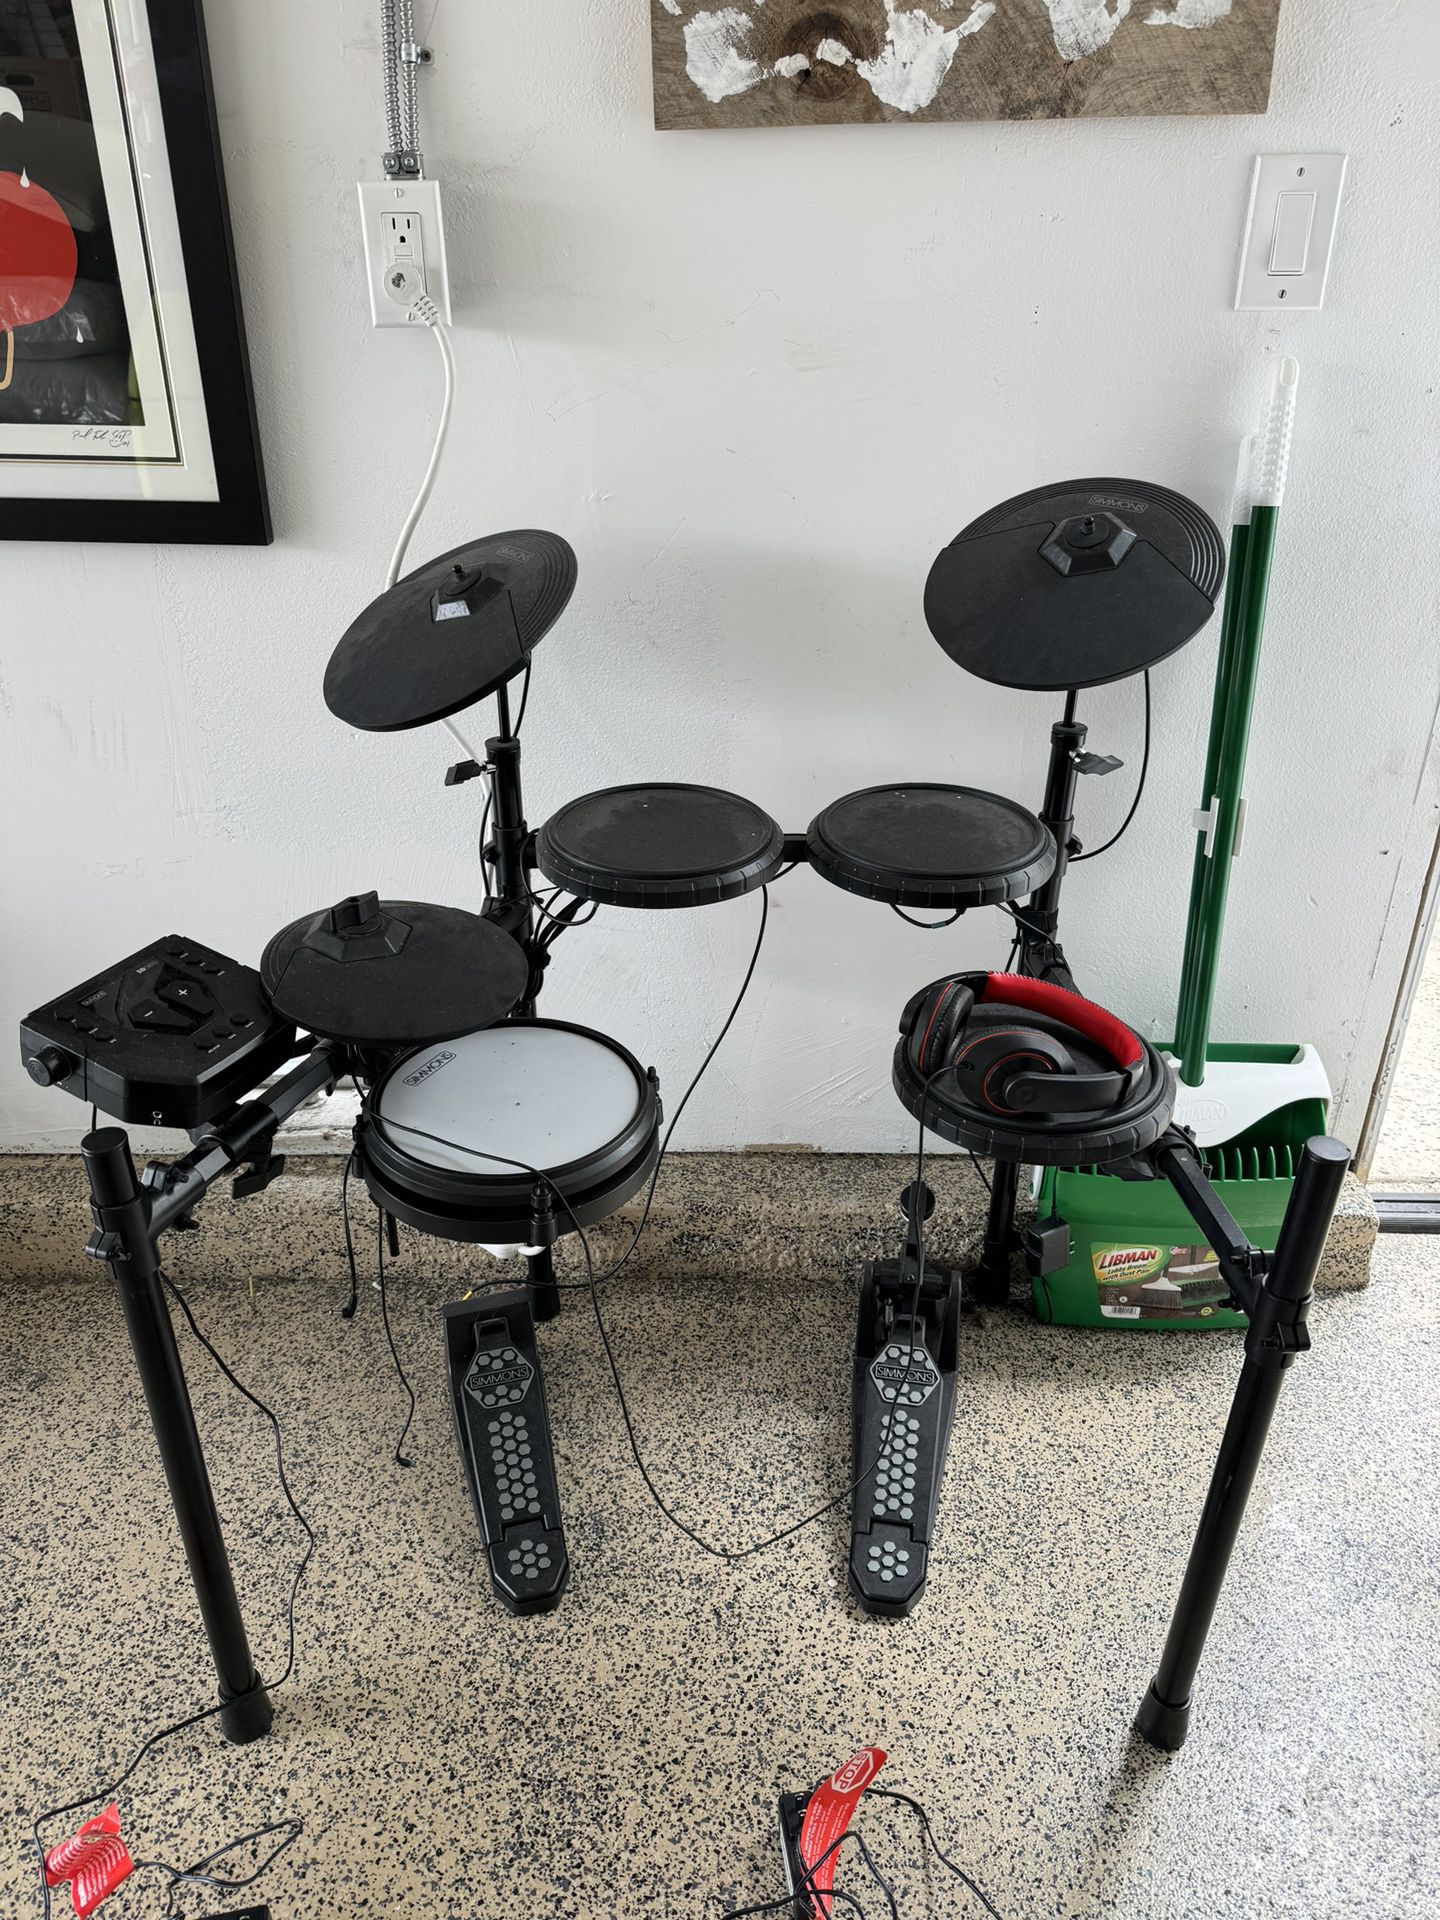 Simmons Electric Drum Set 